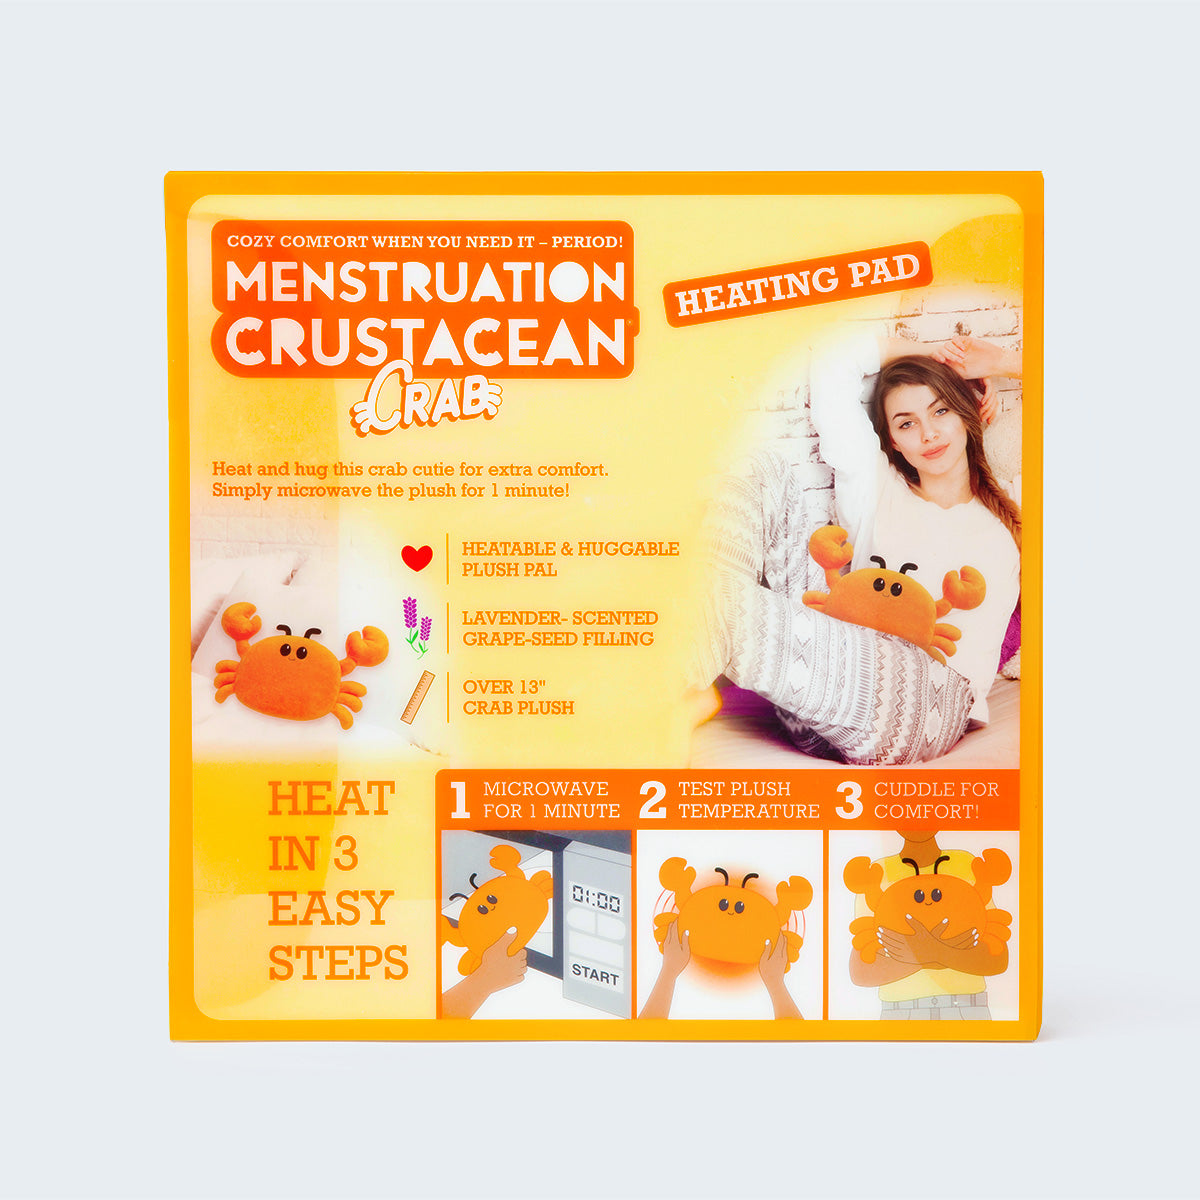 Menstruation Crustacean Crab: Microwaveable Heating Pad for Period Cramps & Muscle Pain